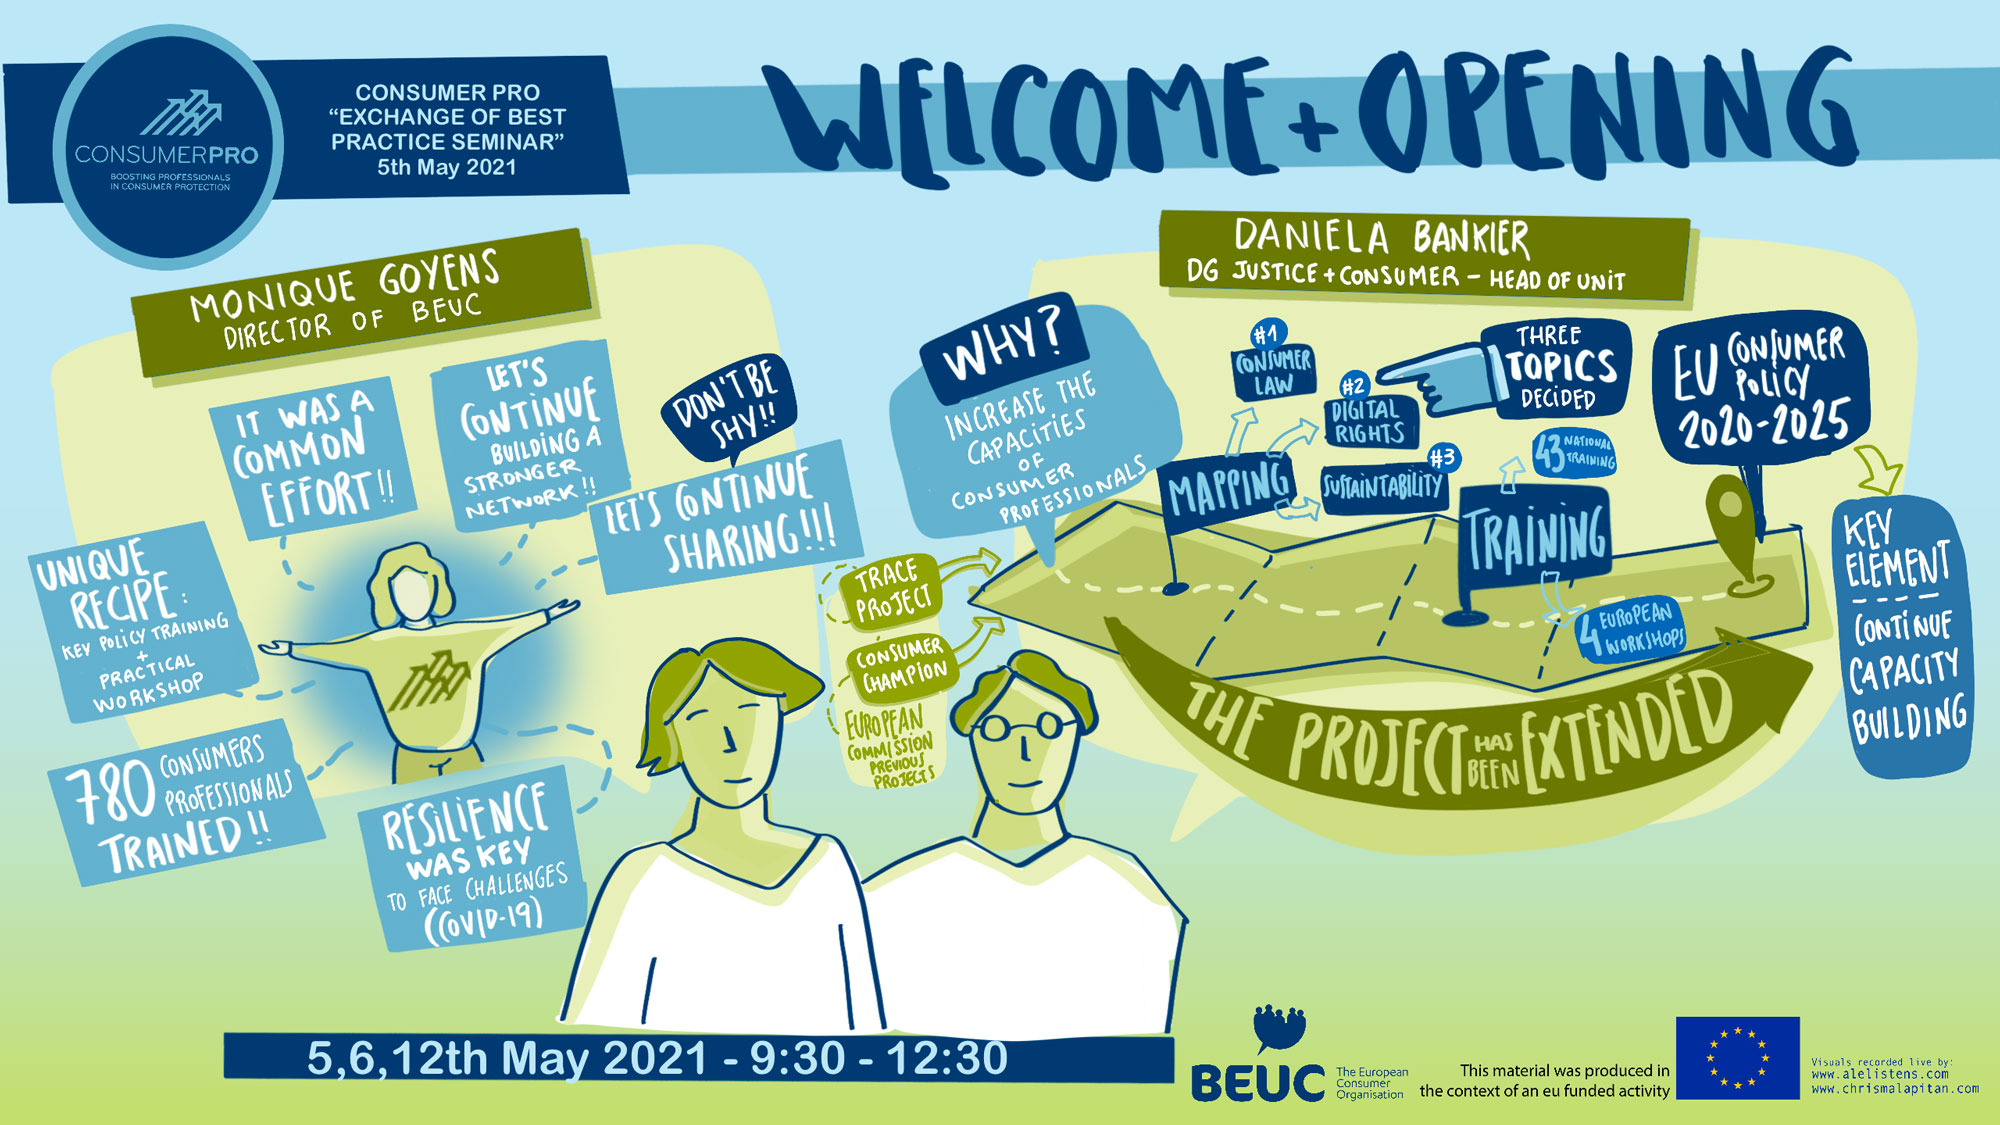 BEUC: Consumer pro project - Exchange of Best Practices Seminar Day 1 (1)